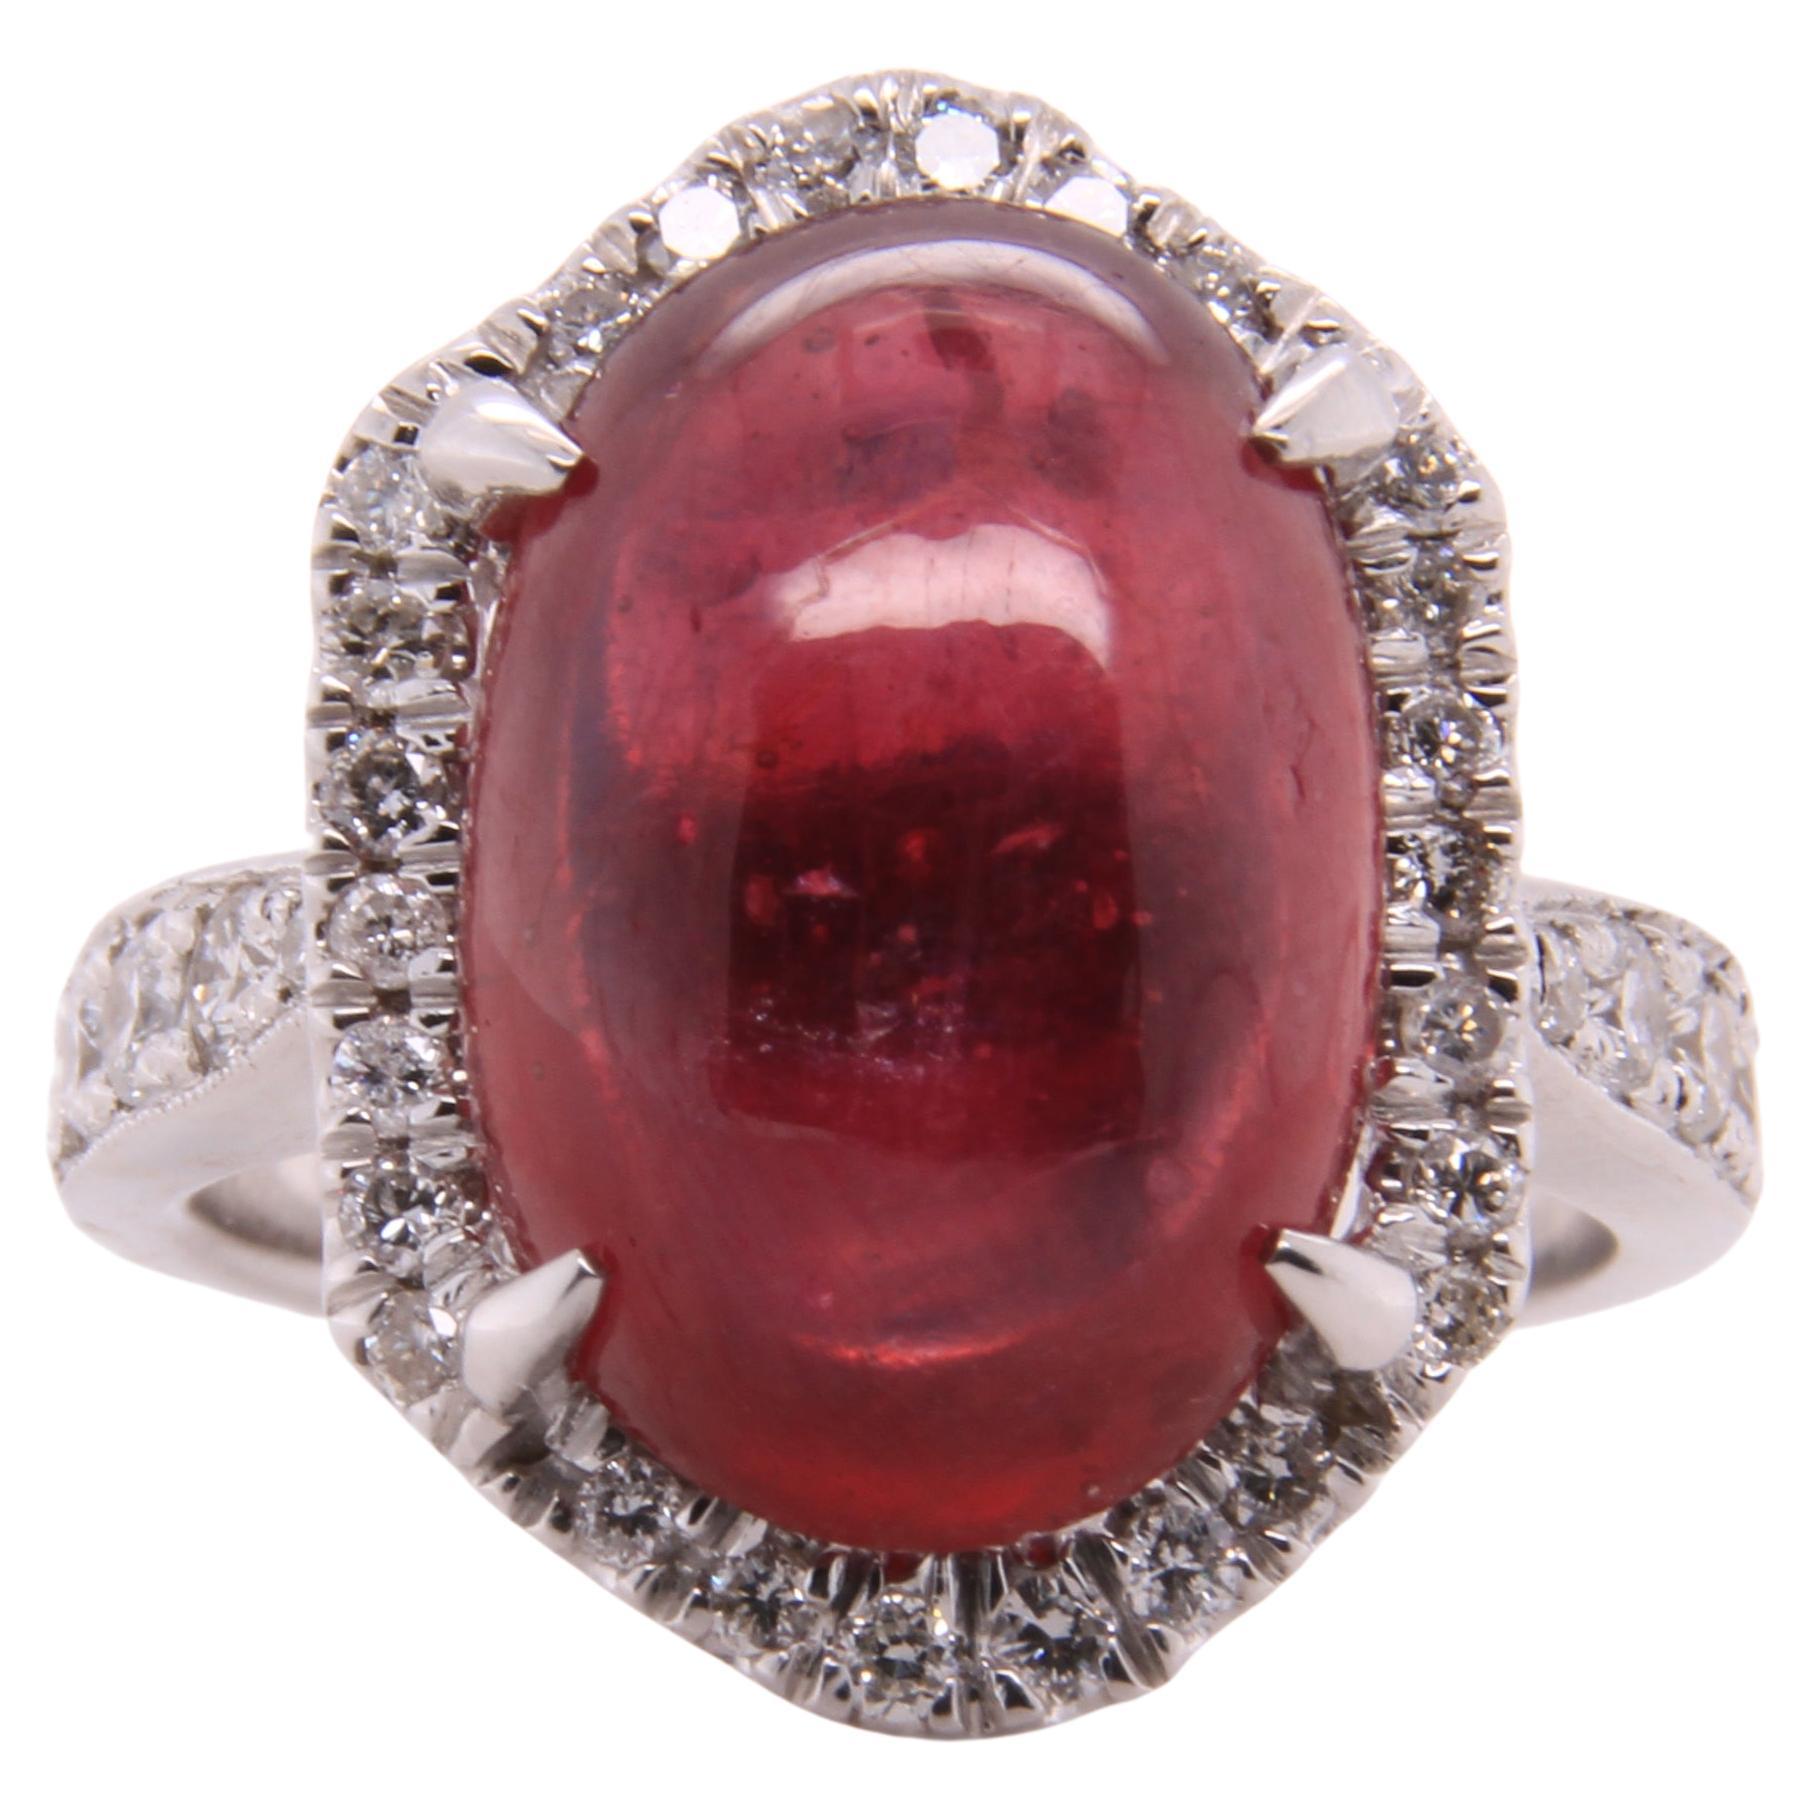 11 Carat Ruby Cabochon, Dome, with Diamonds, Cocktail Ring